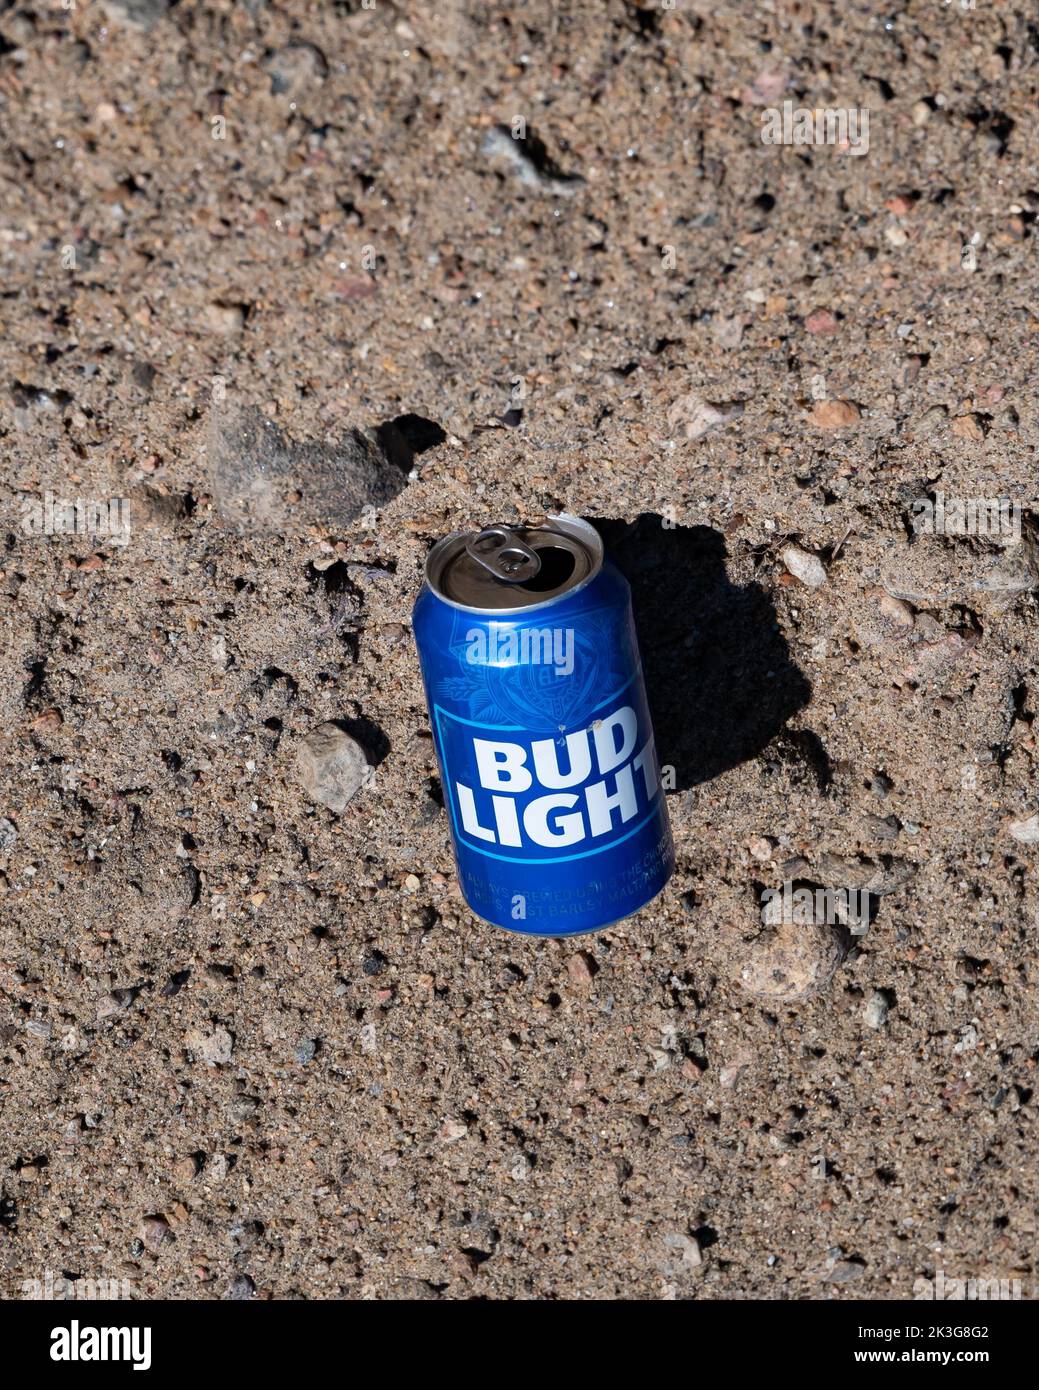 Litter - an empty Bud Light beer can left in the sand and gravel on the side of a road in the Adirondack Mountains, NY Stock Photo